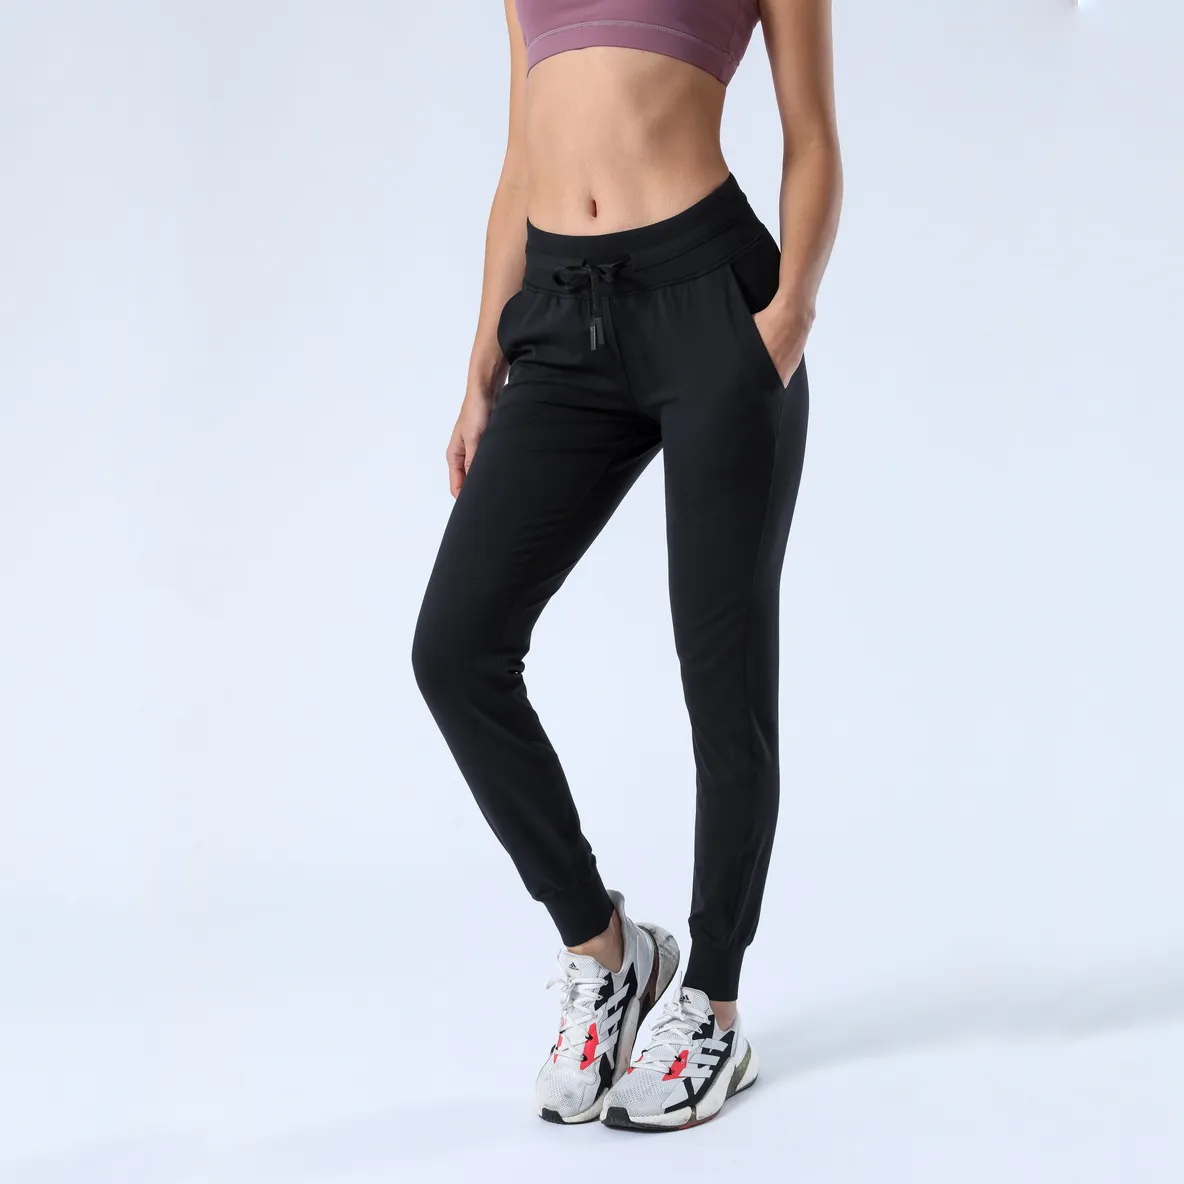 High Waist Athletic Crz Yoga Joggers With Side Pockets For Women L R Running  Leggings For Outdoor Sports And Workout From Outlet777, $24.58